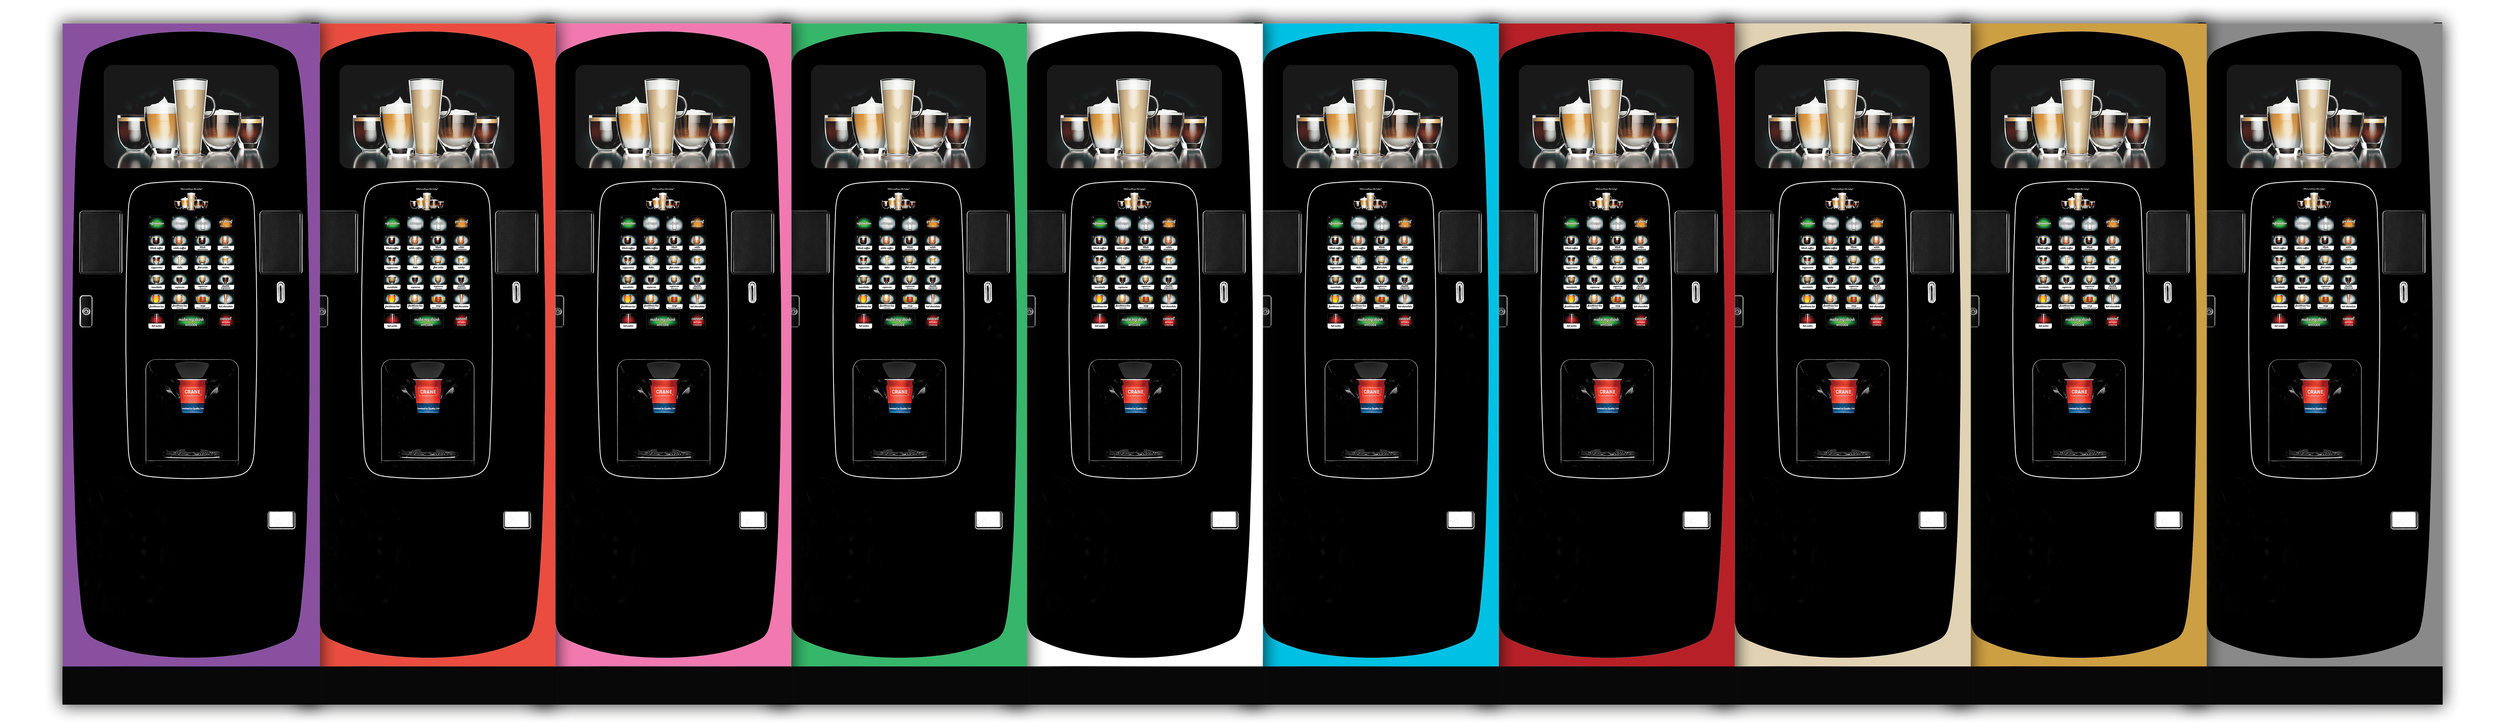 Iberital Expression Coffee Machines – Vending Machines, Snack Machines, Coffee  Machines, Water Coolers, Hull, East Yorkshire, Yorkshire